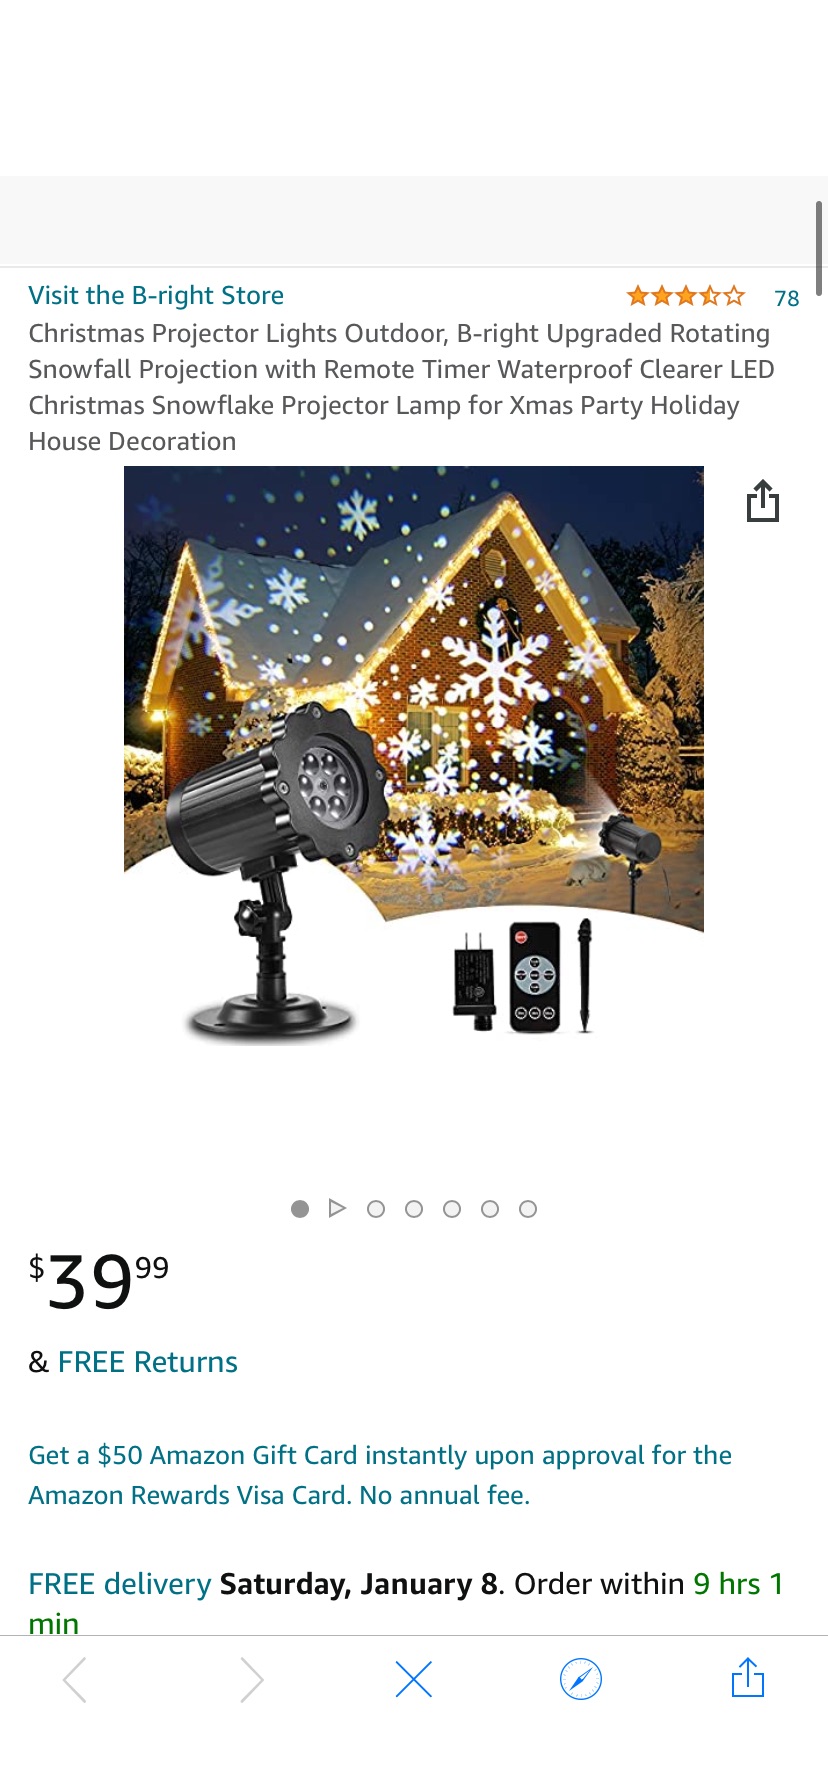 Amazon.com: Christmas Projector Lights Outdoor, B-right Upgraded Rotating Snowfall Projection with Remote Timer Waterproof Clearer LED Christmas Snowflake Projector Lamp 圣诞射灯